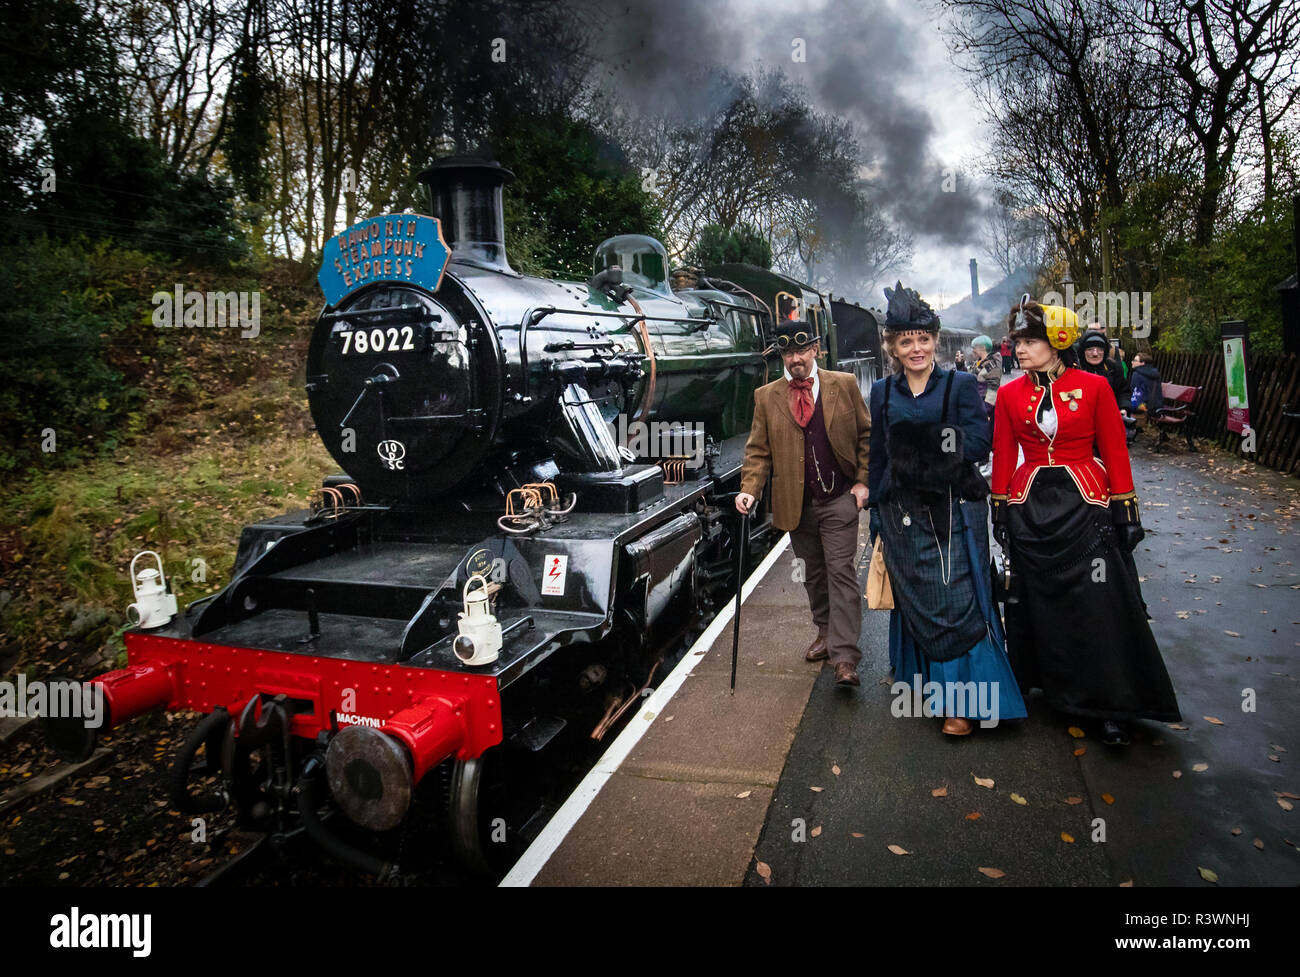 Steampunks next to a steam locomotive during the Haworth Steampunk Weekend, as hundreds of Steampunks descend on the quite village of Haworth in the Pennine hills of West Yorkshire, England. Stock Photo